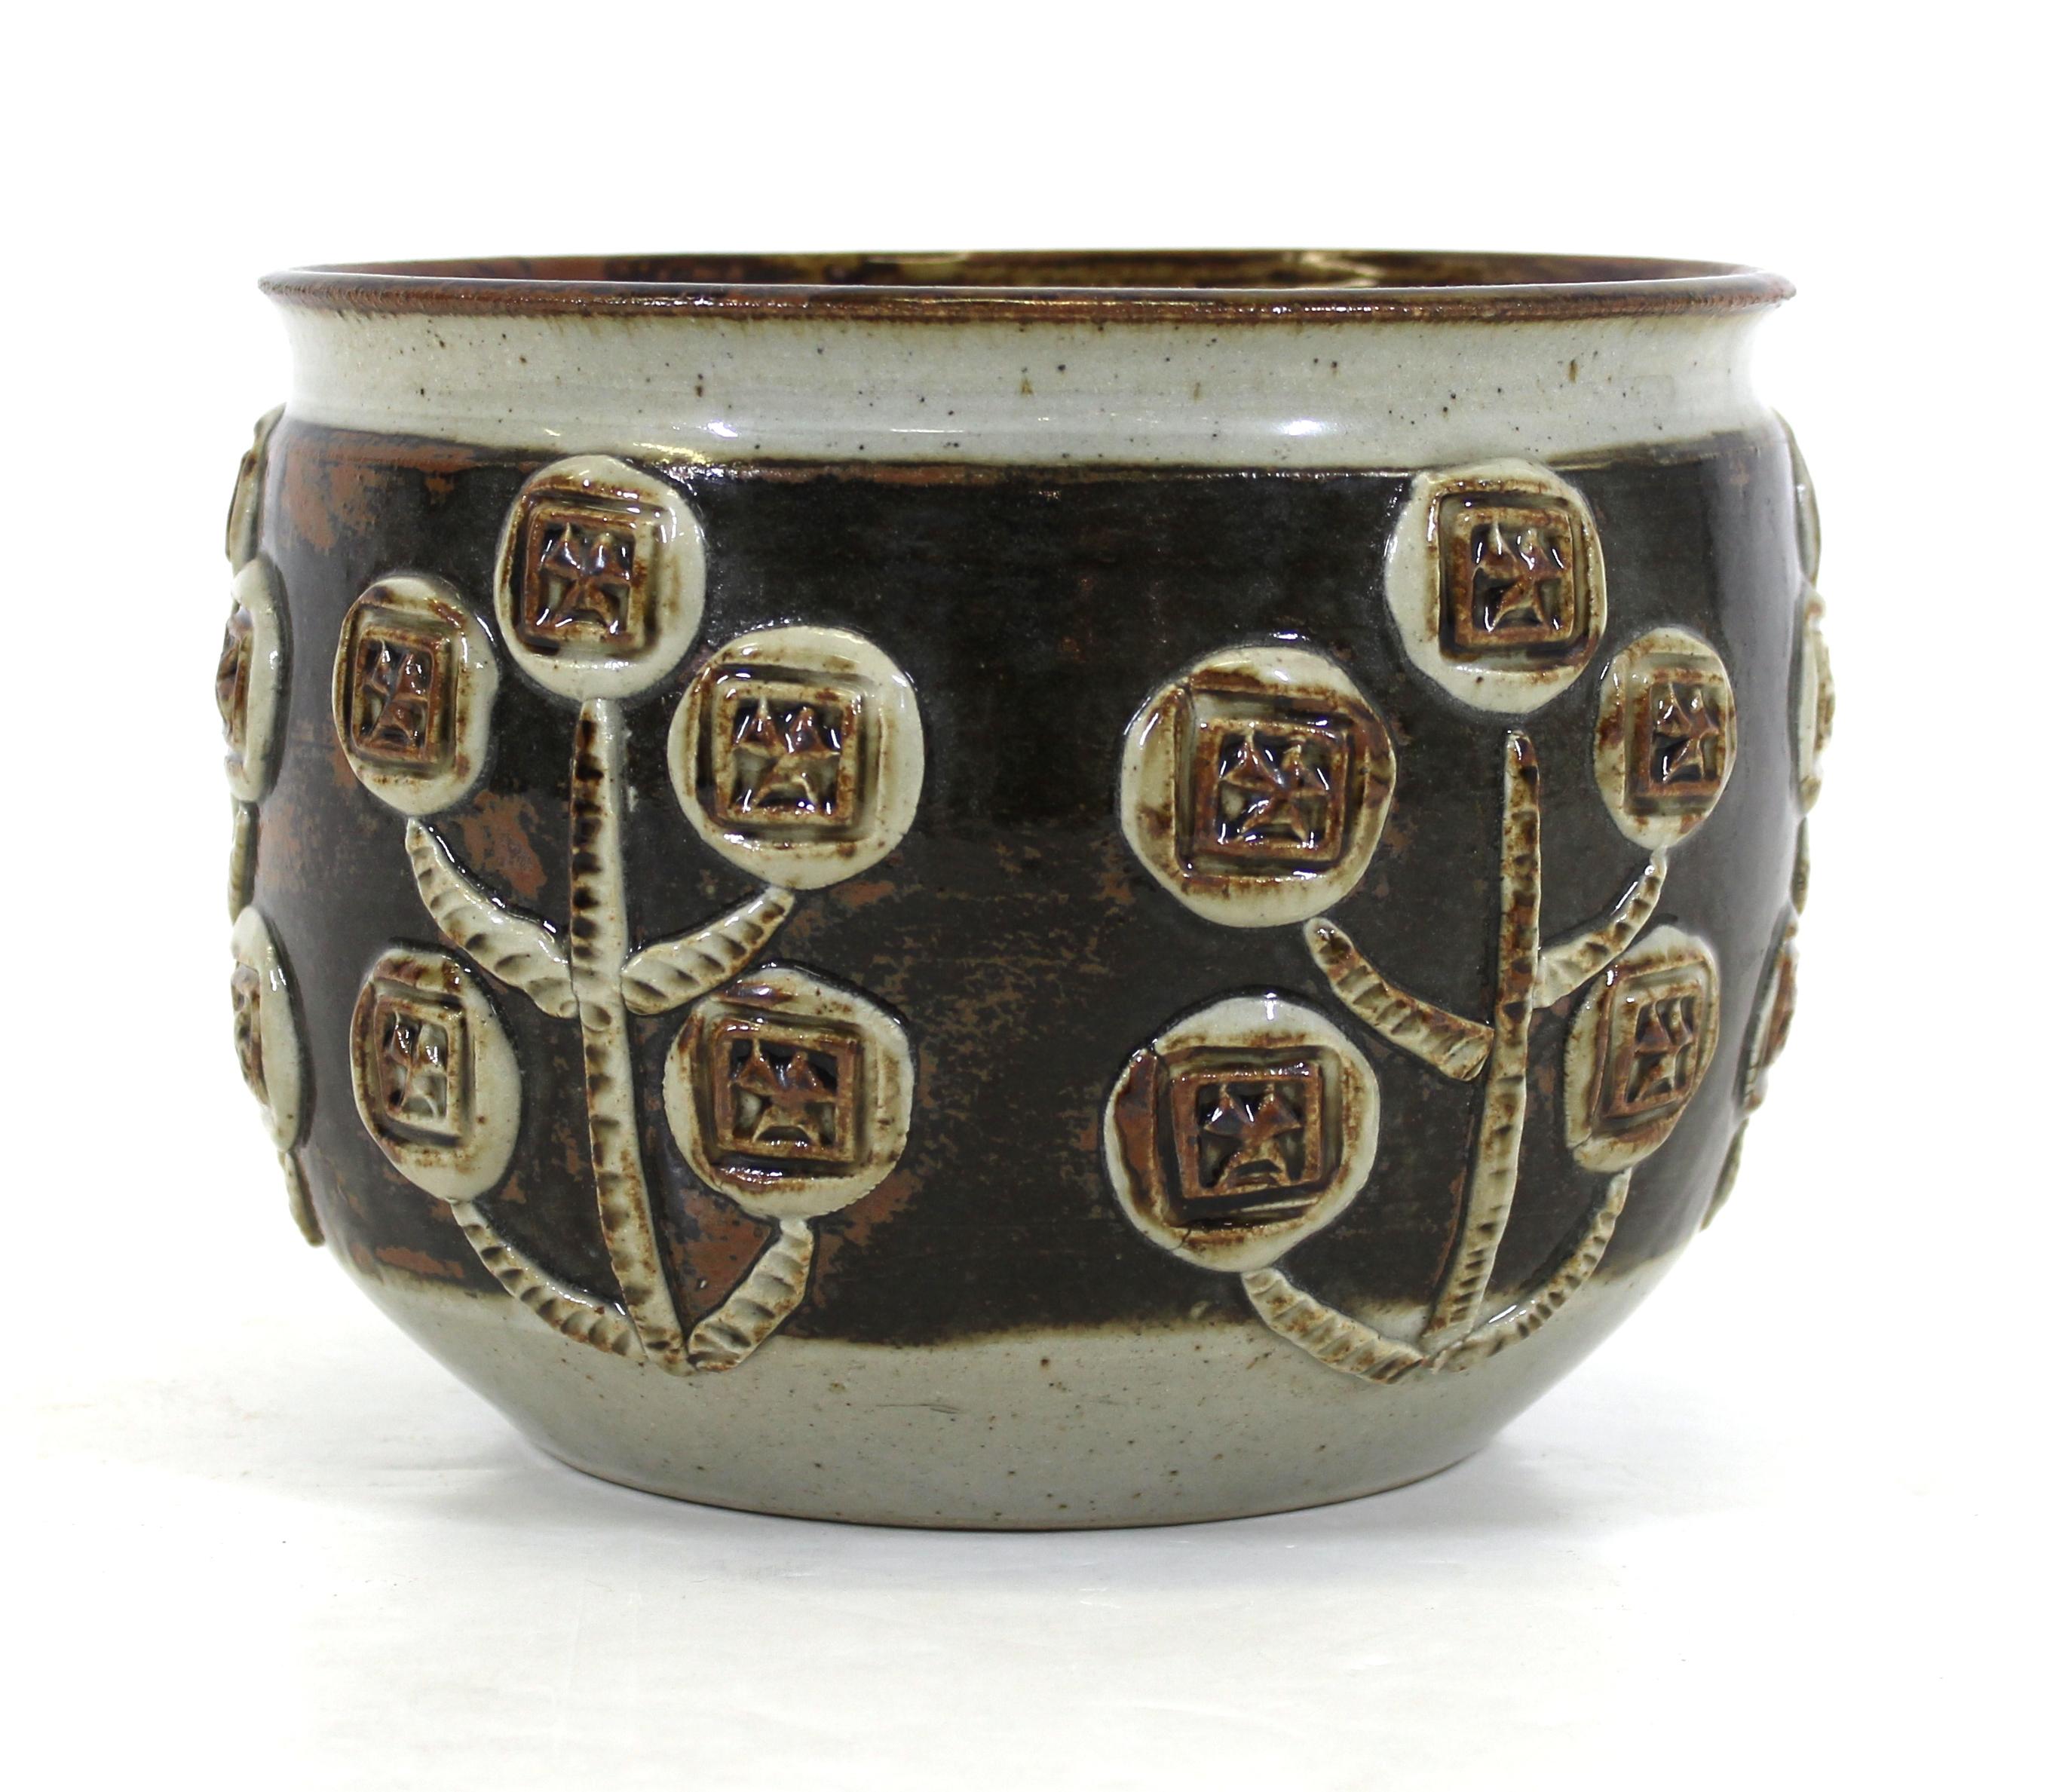 Danish Mid-Century Modern art Studio Pottery ceramic planter with floral motif, marked 'Denmark' on bottom and initialed 'BL'.